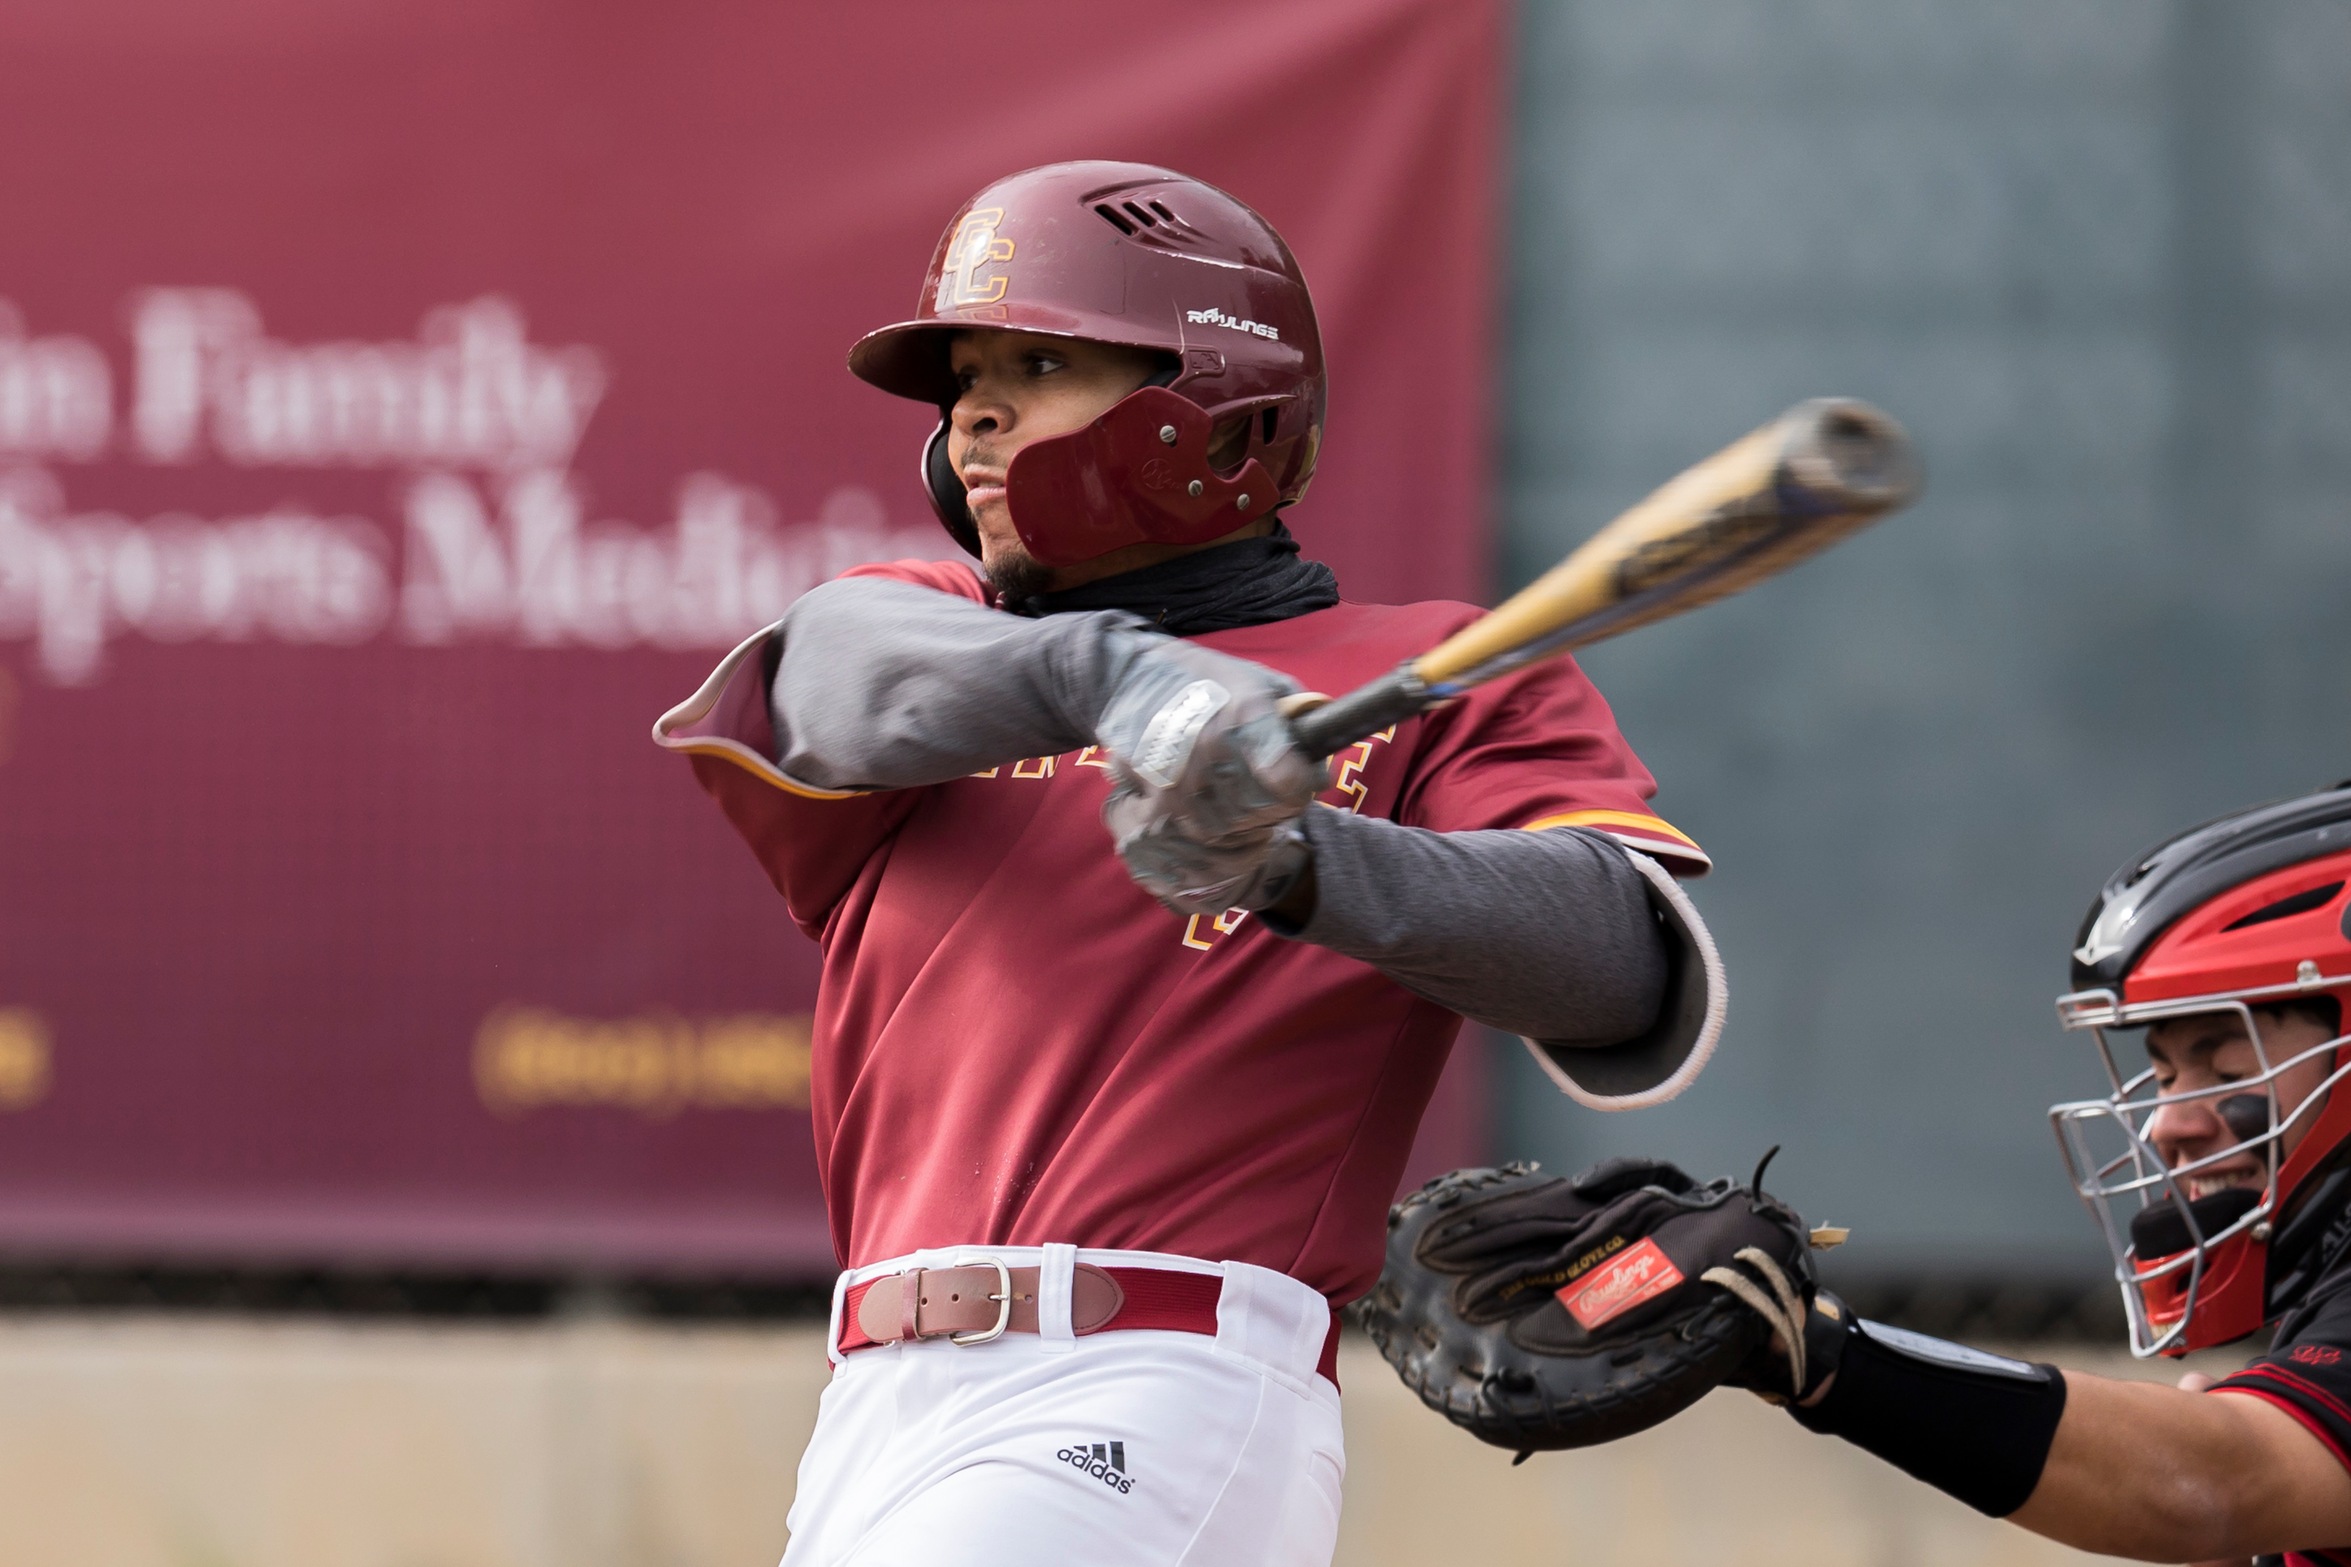 GCC Baseball improves to 9-3 with a 9-3 win over Fullerton Feb. 24